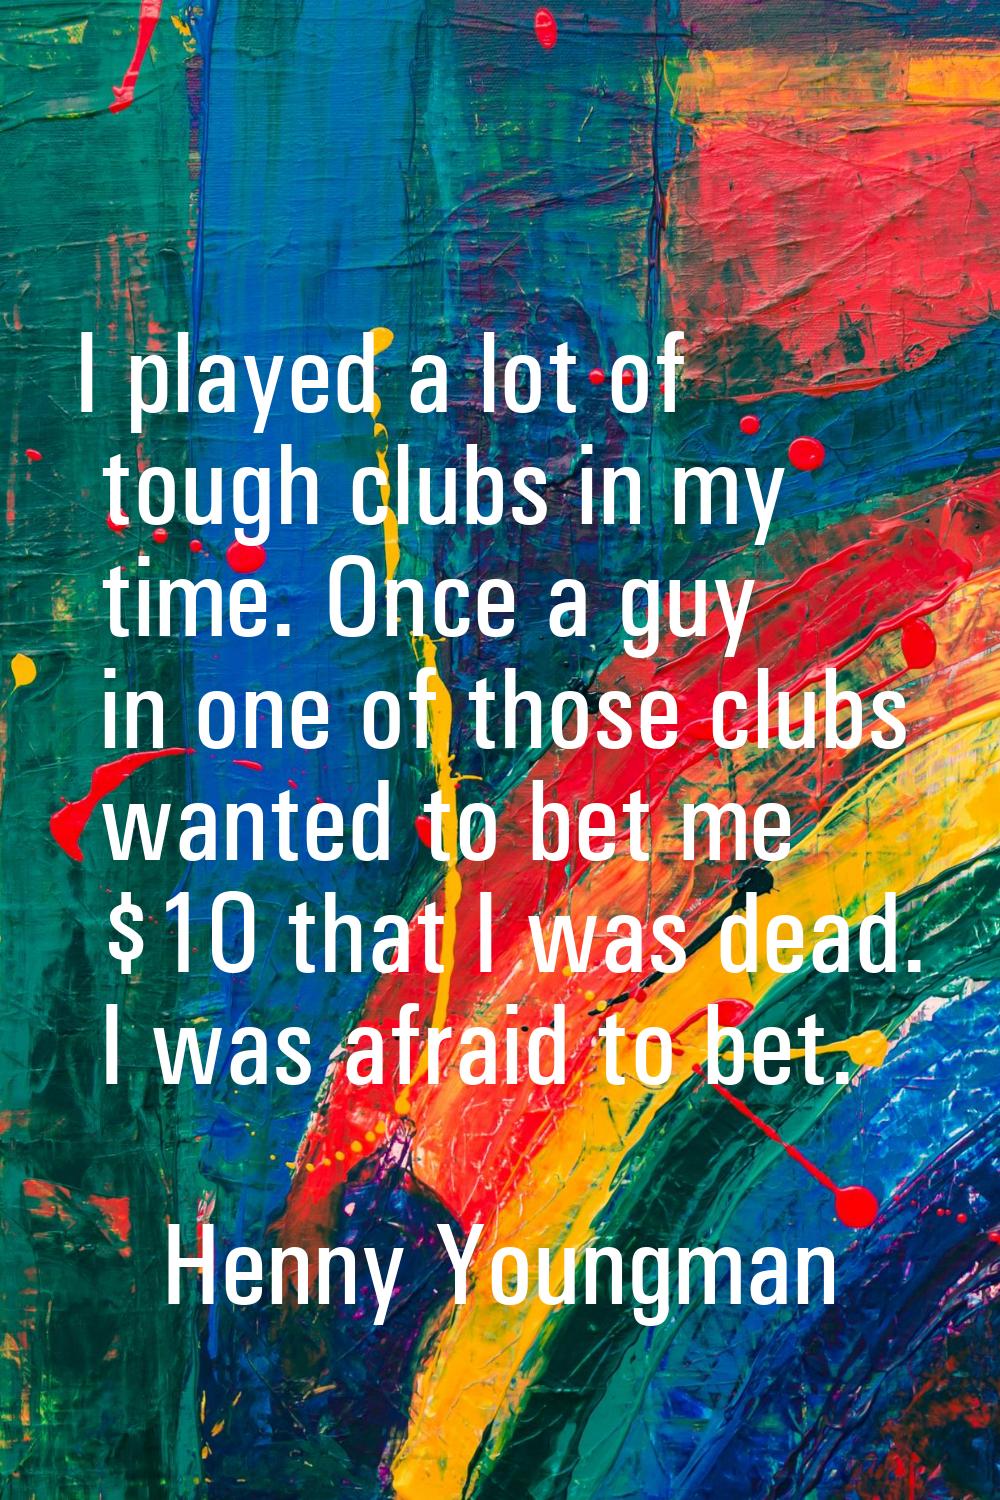 I played a lot of tough clubs in my time. Once a guy in one of those clubs wanted to bet me $10 tha